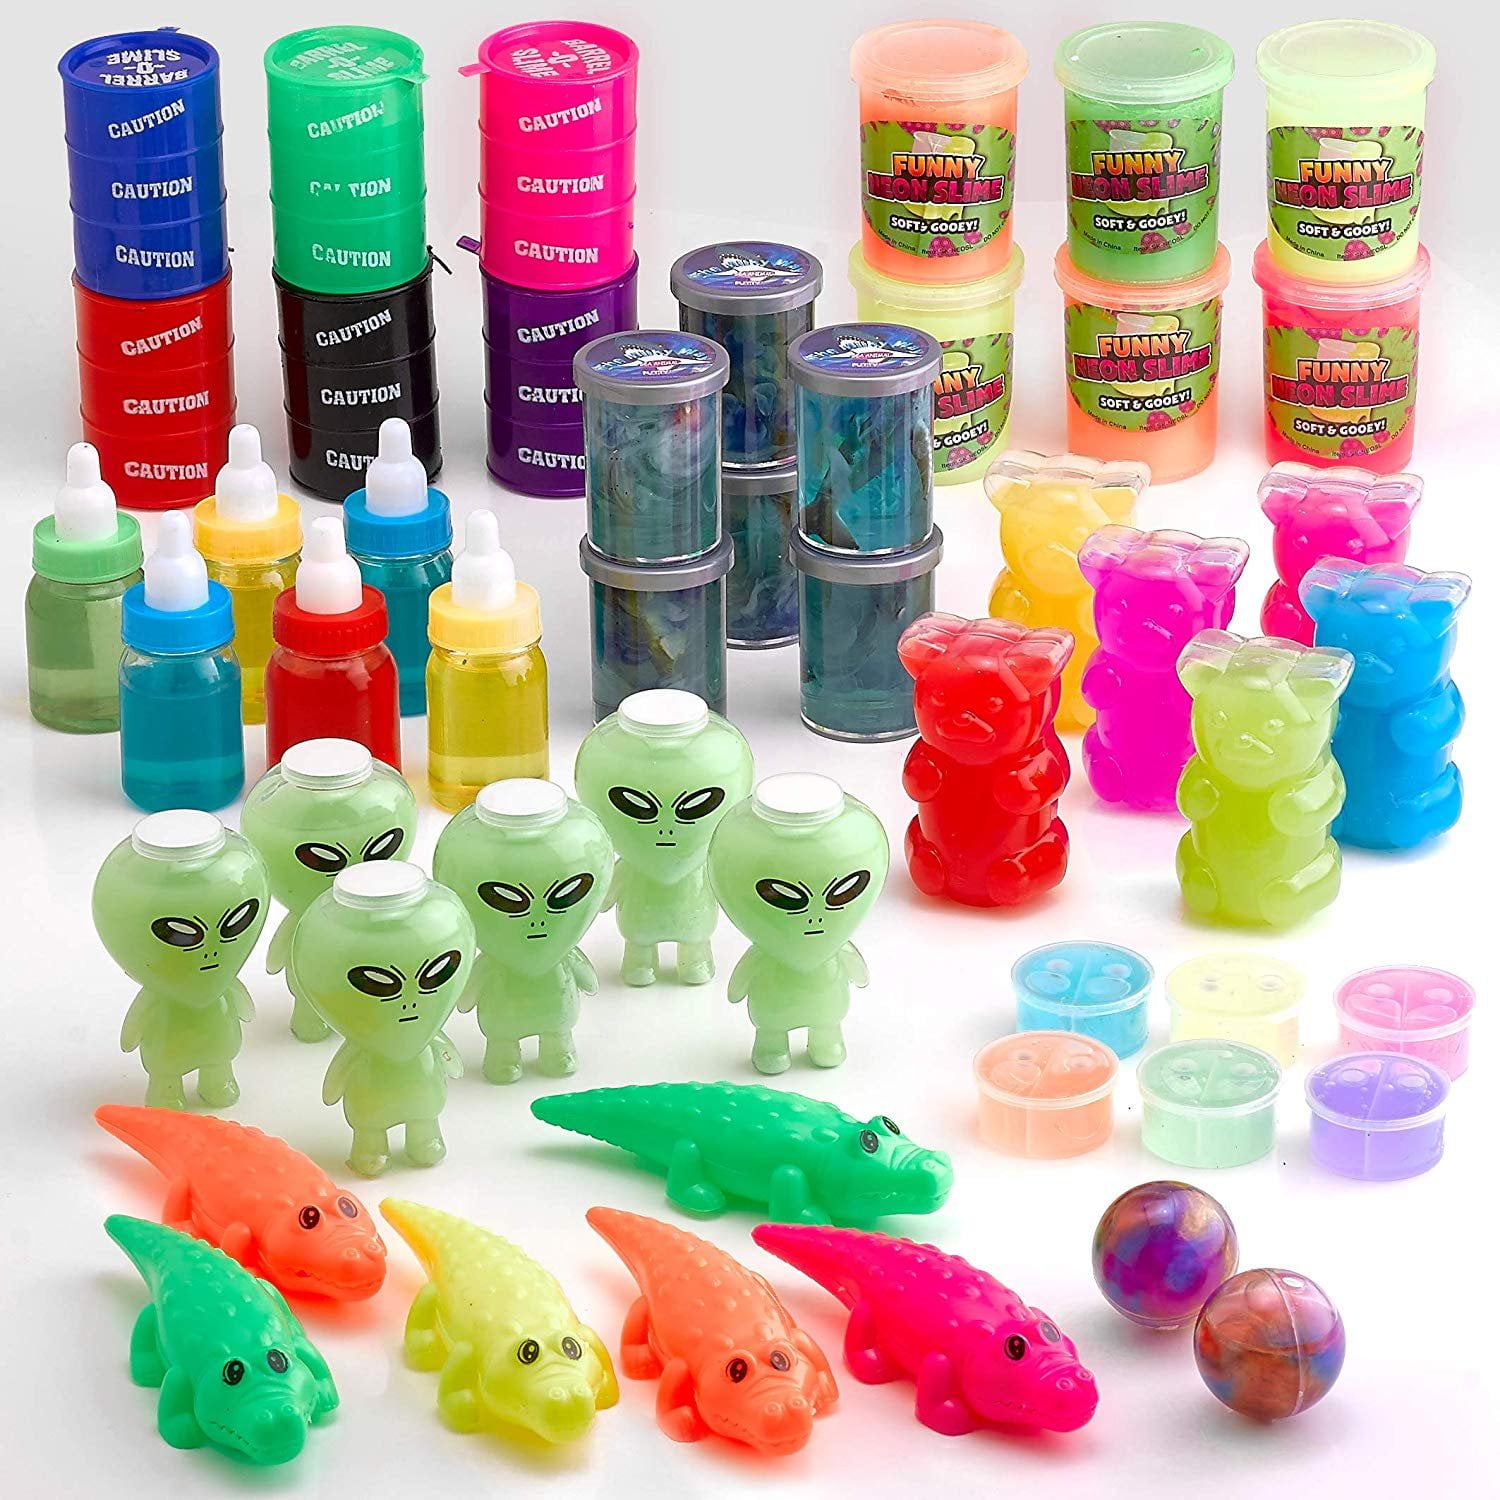 Buy Kicko Putty And Slime Mega Pack 50 Piece Assortment Bottles And